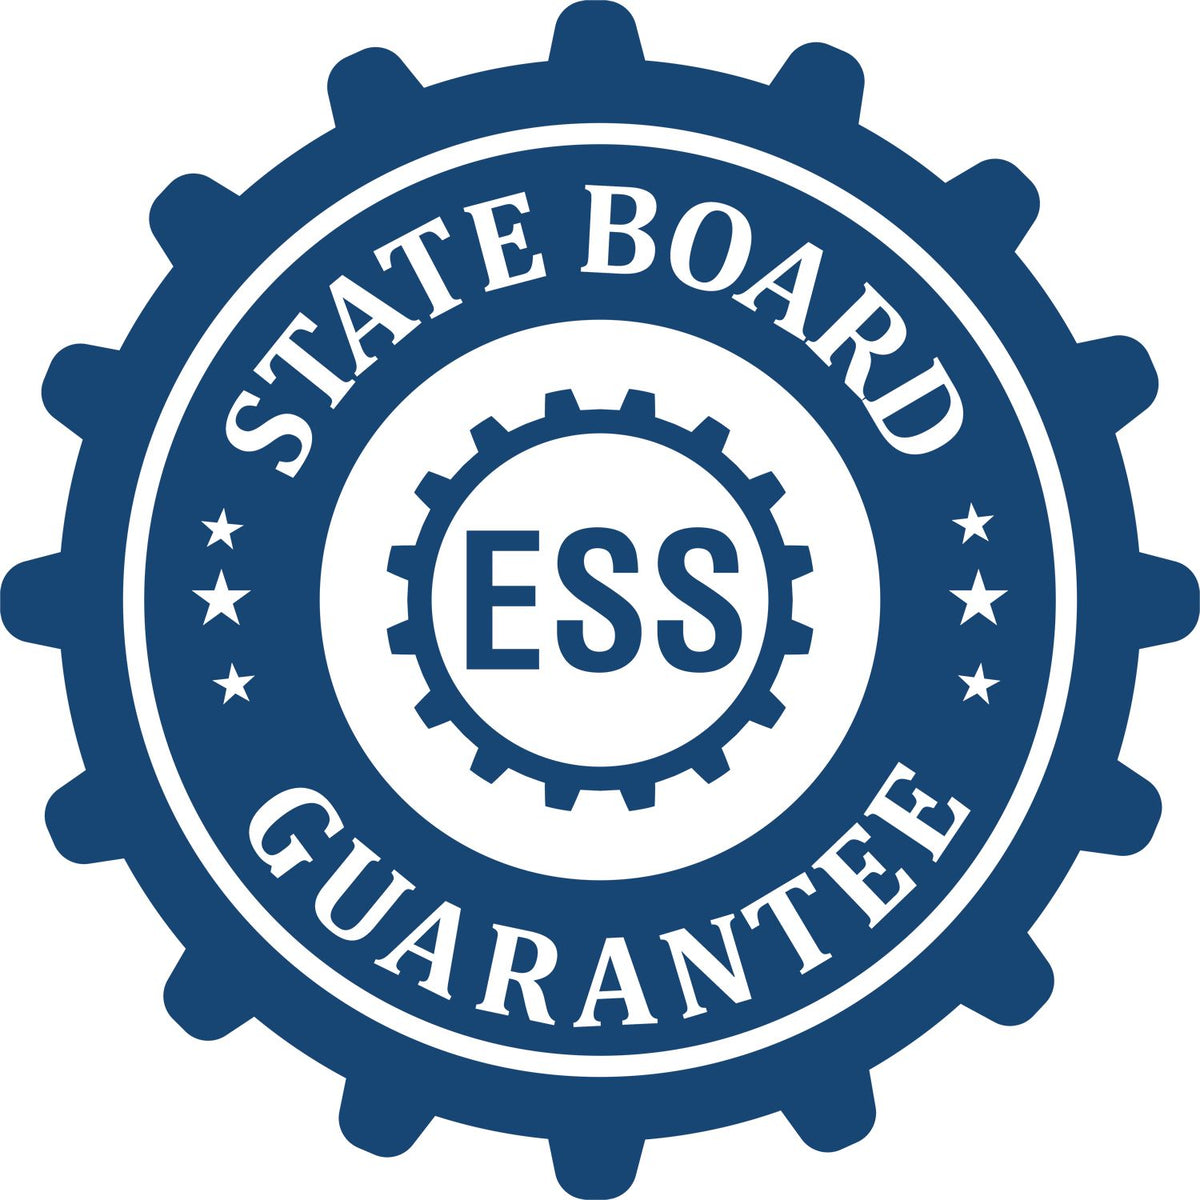 An emblem in a gear shape illustrating a state board guarantee for the Digital District of Columbia Landscape Architect Stamp product.